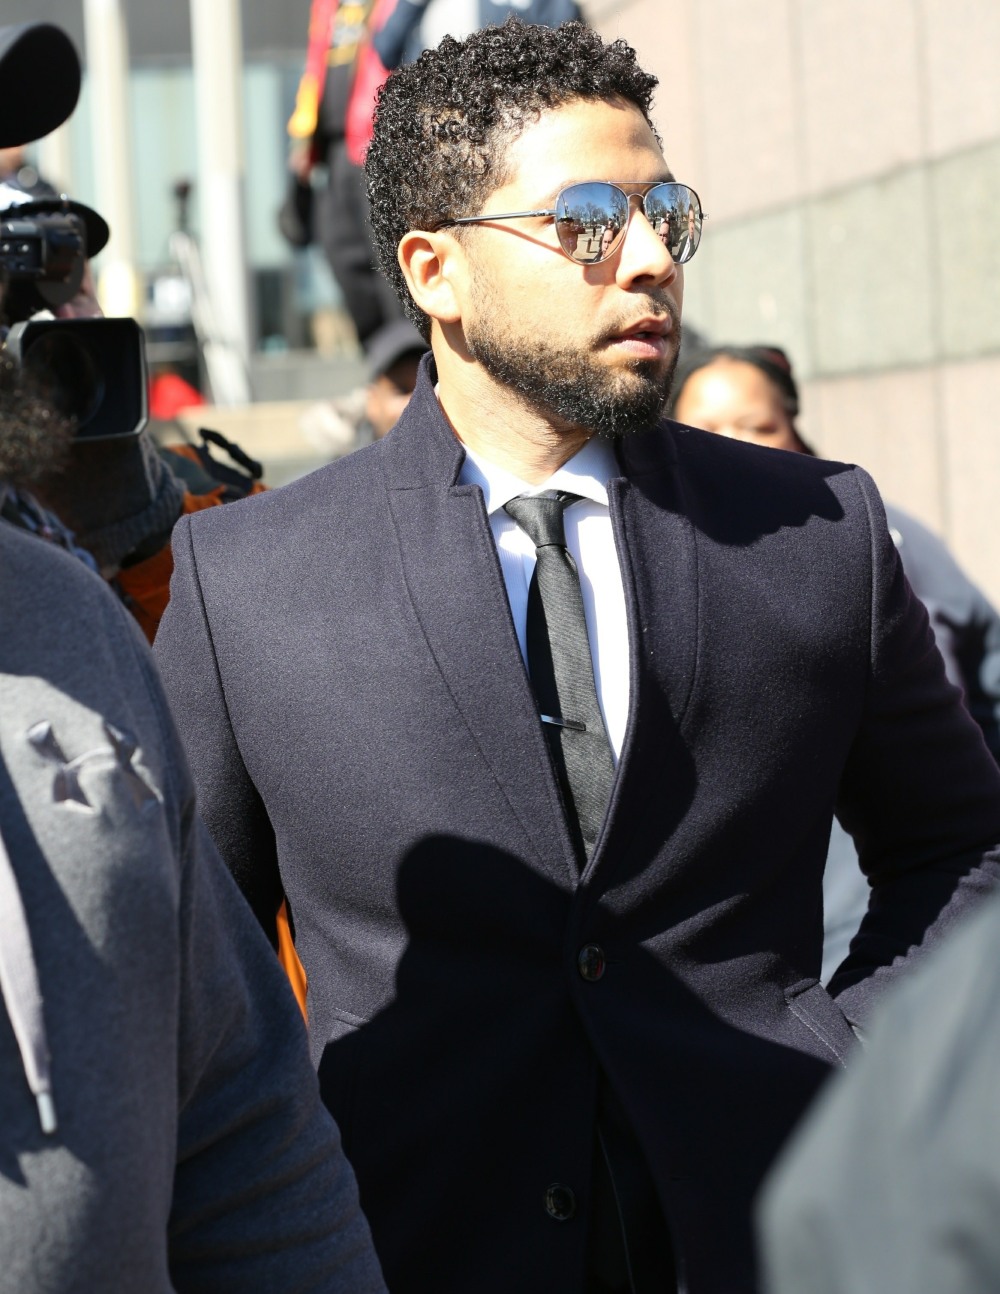 Jussie Smollett leaves court after all charges are dropped against him